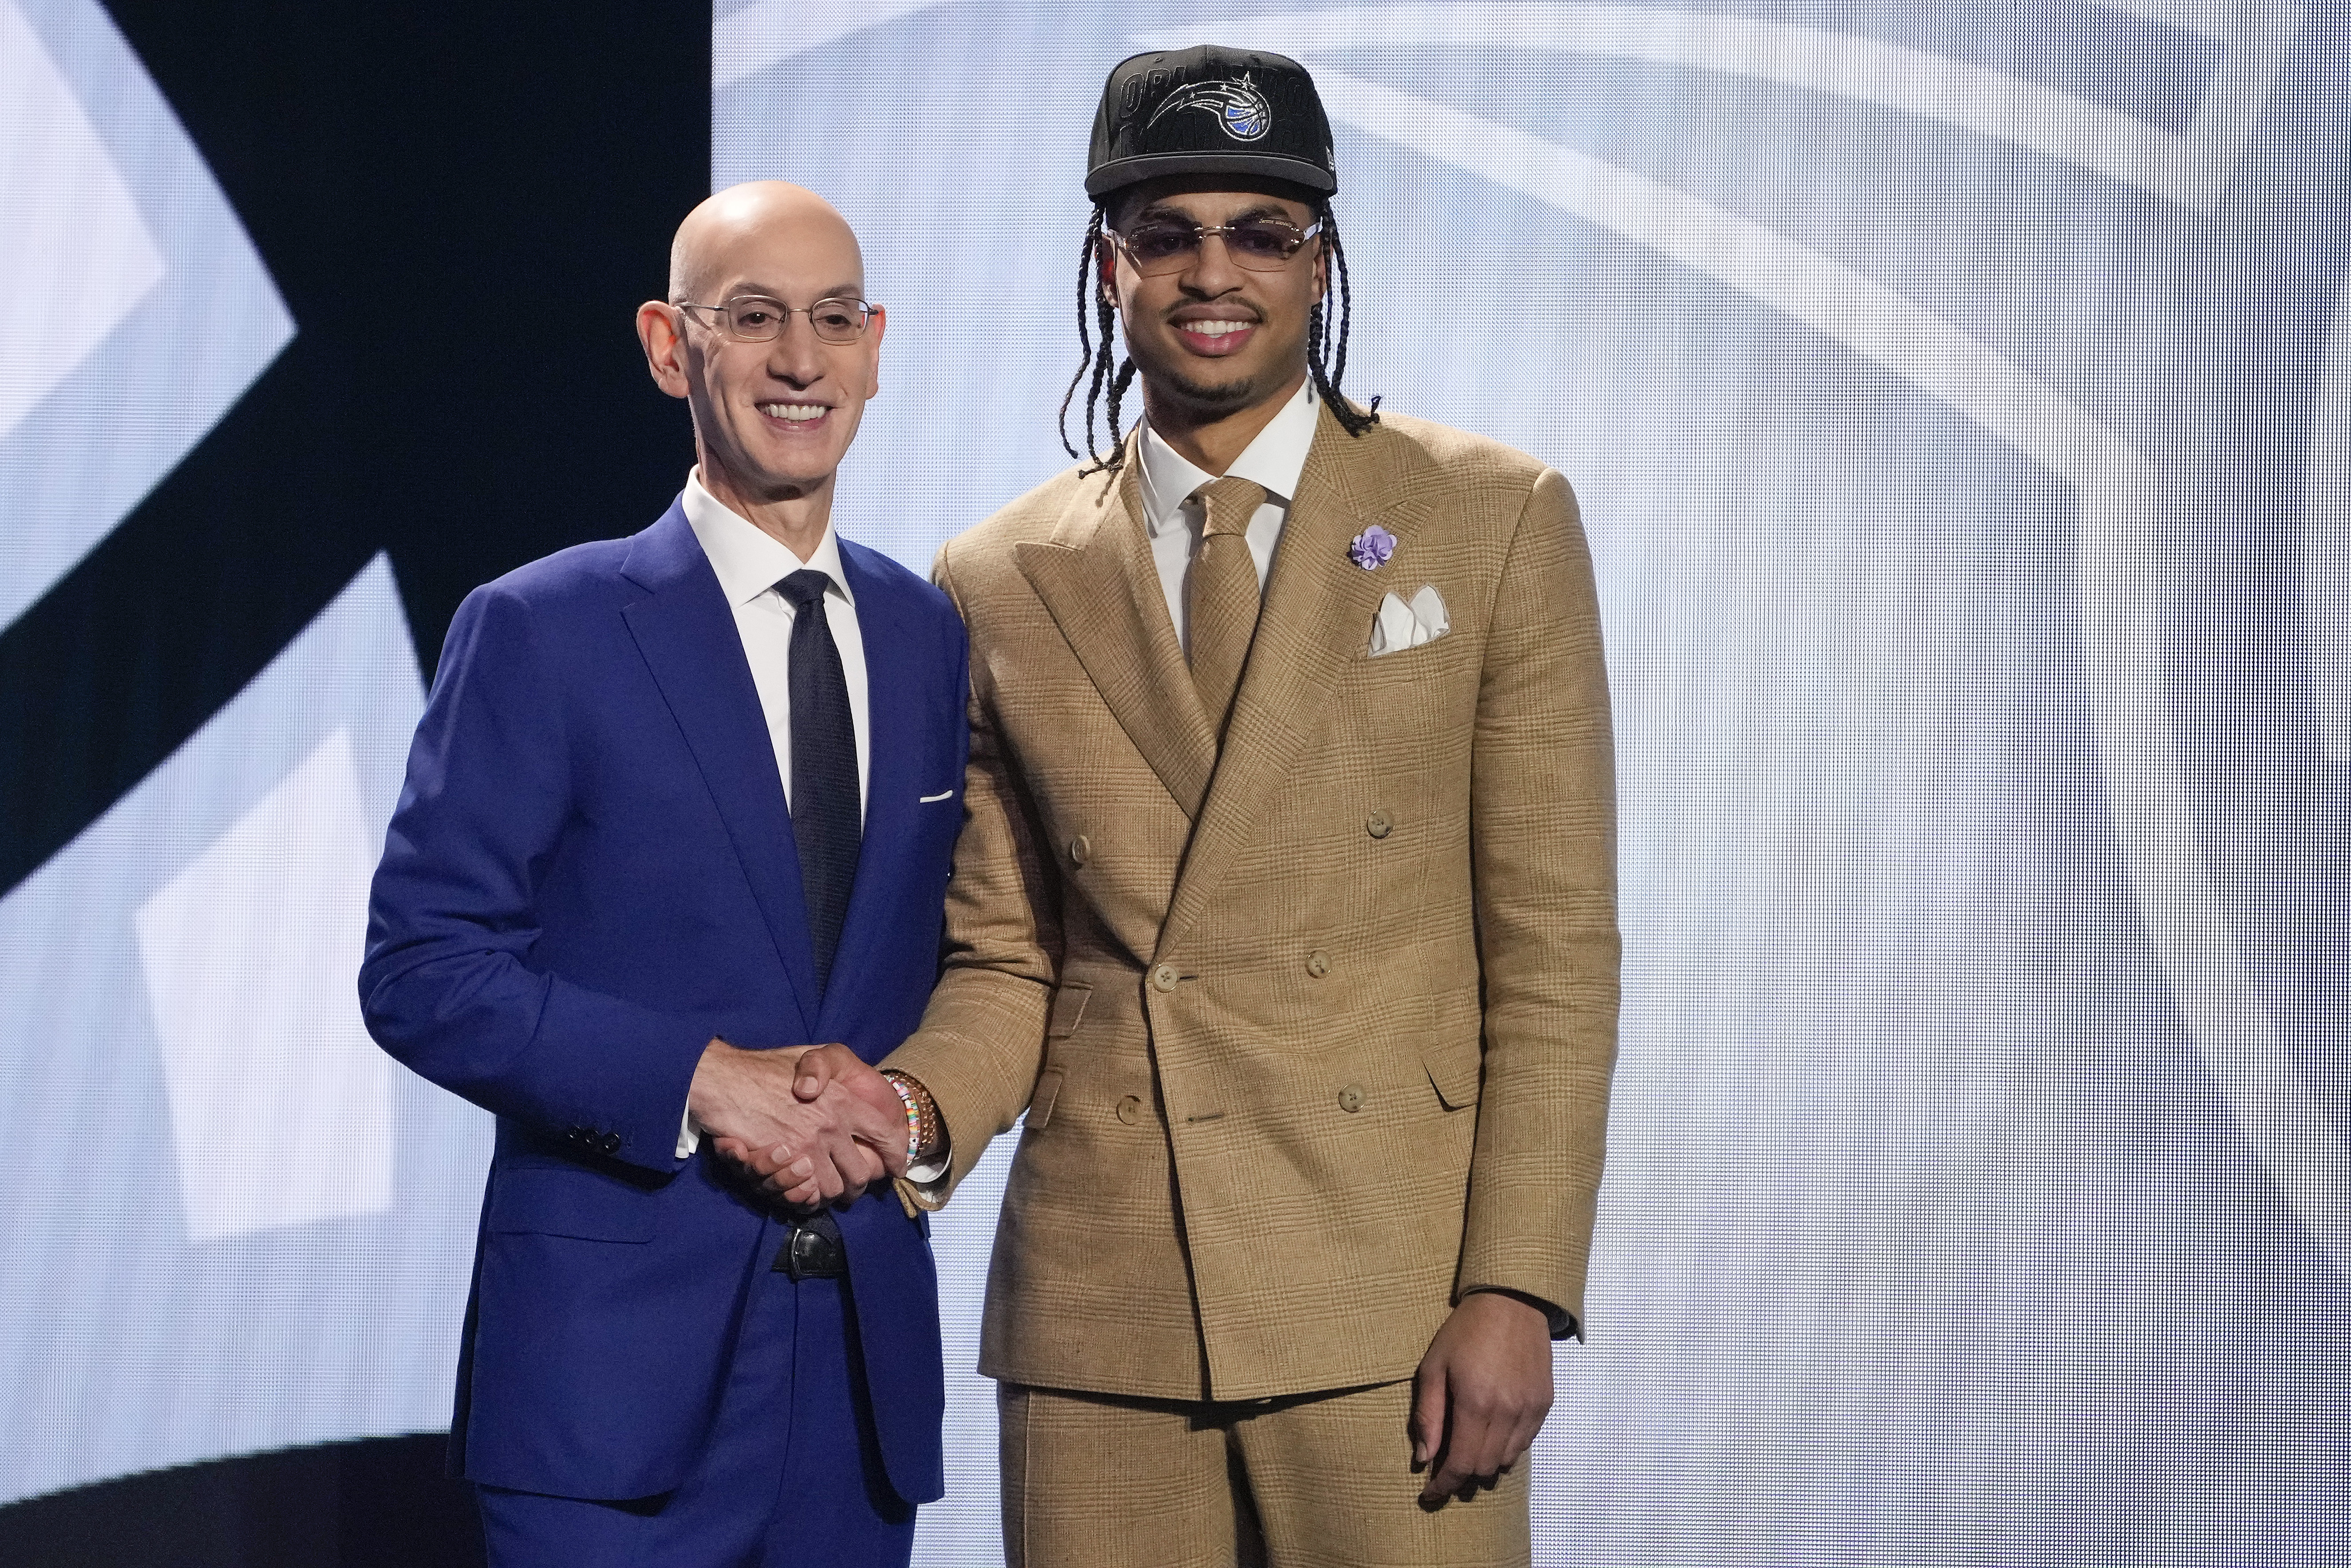 NBA Draft Fashion Through the Years - Sports Illustrated